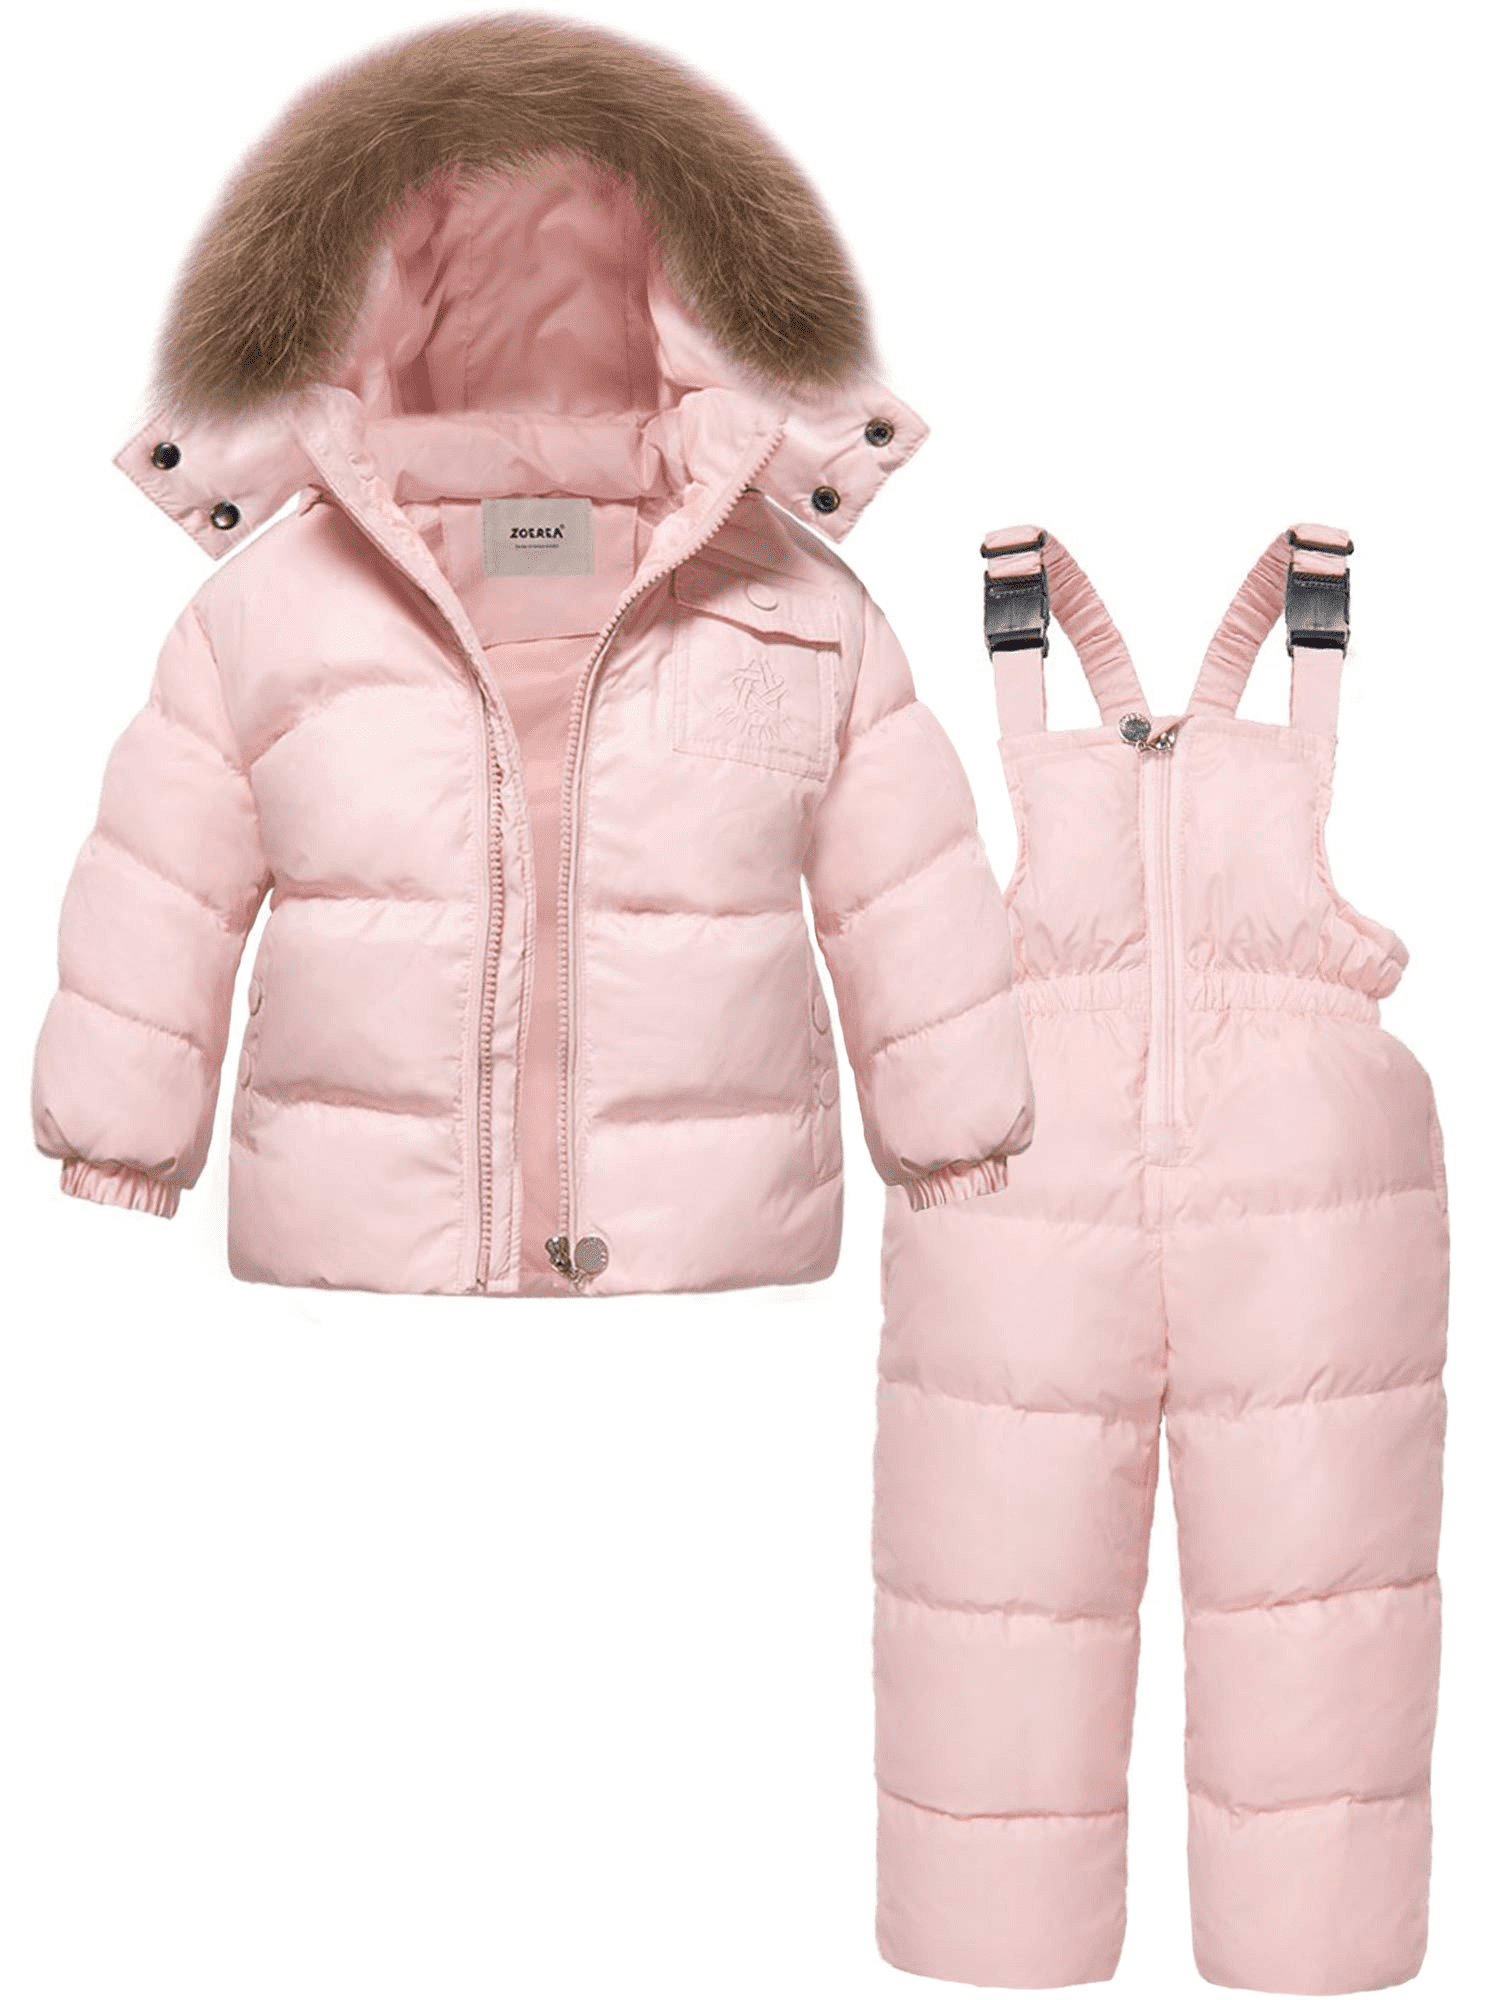 Girls Winter Snowsuit, Children Clothing Sets Winter Hooded Duck Down Jacket + Trousers Snowsuit for Boys Unisex Baby